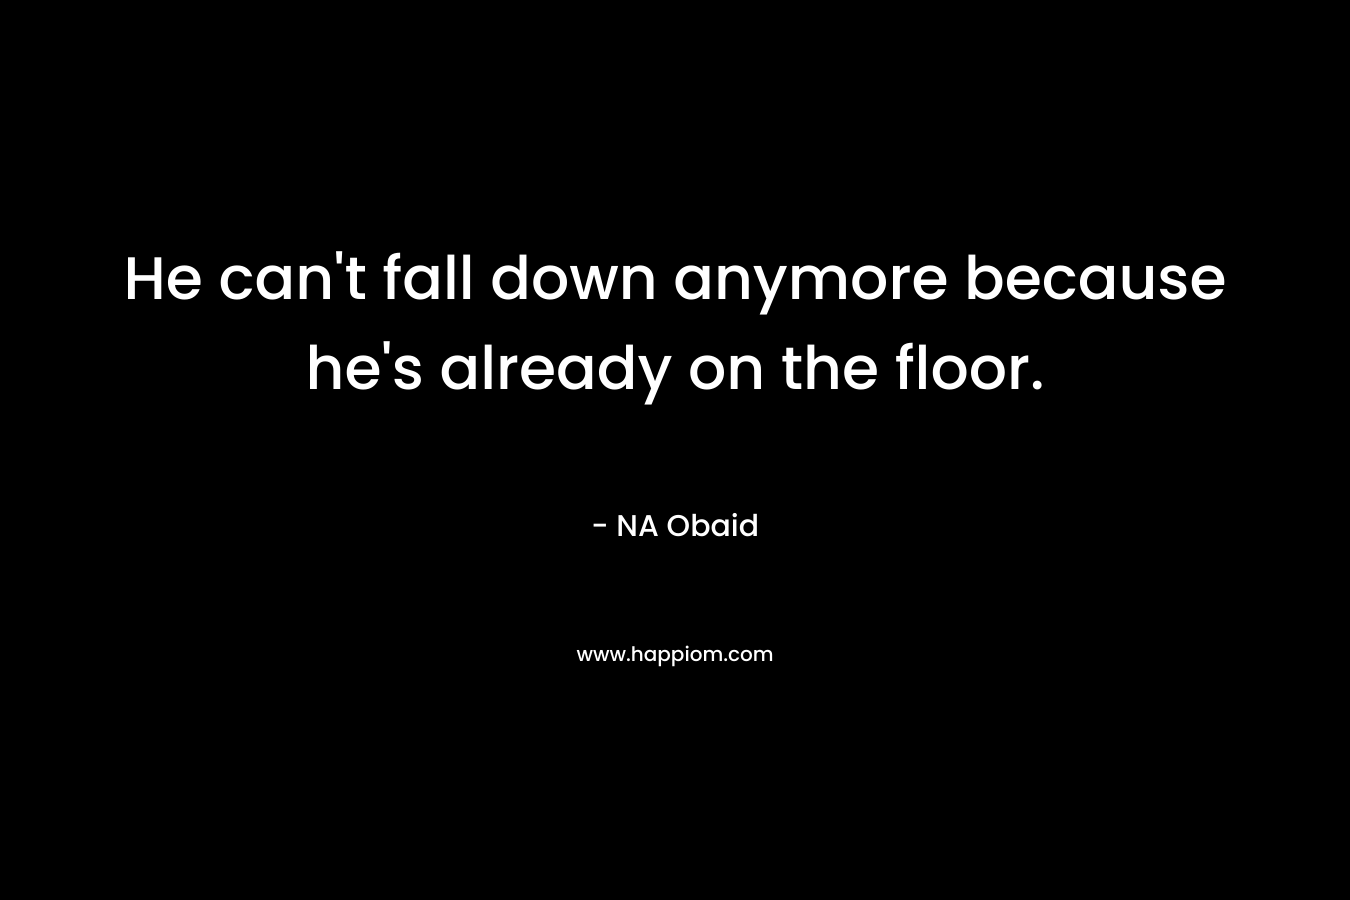 He can’t fall down anymore because he’s already on the floor. – NA Obaid